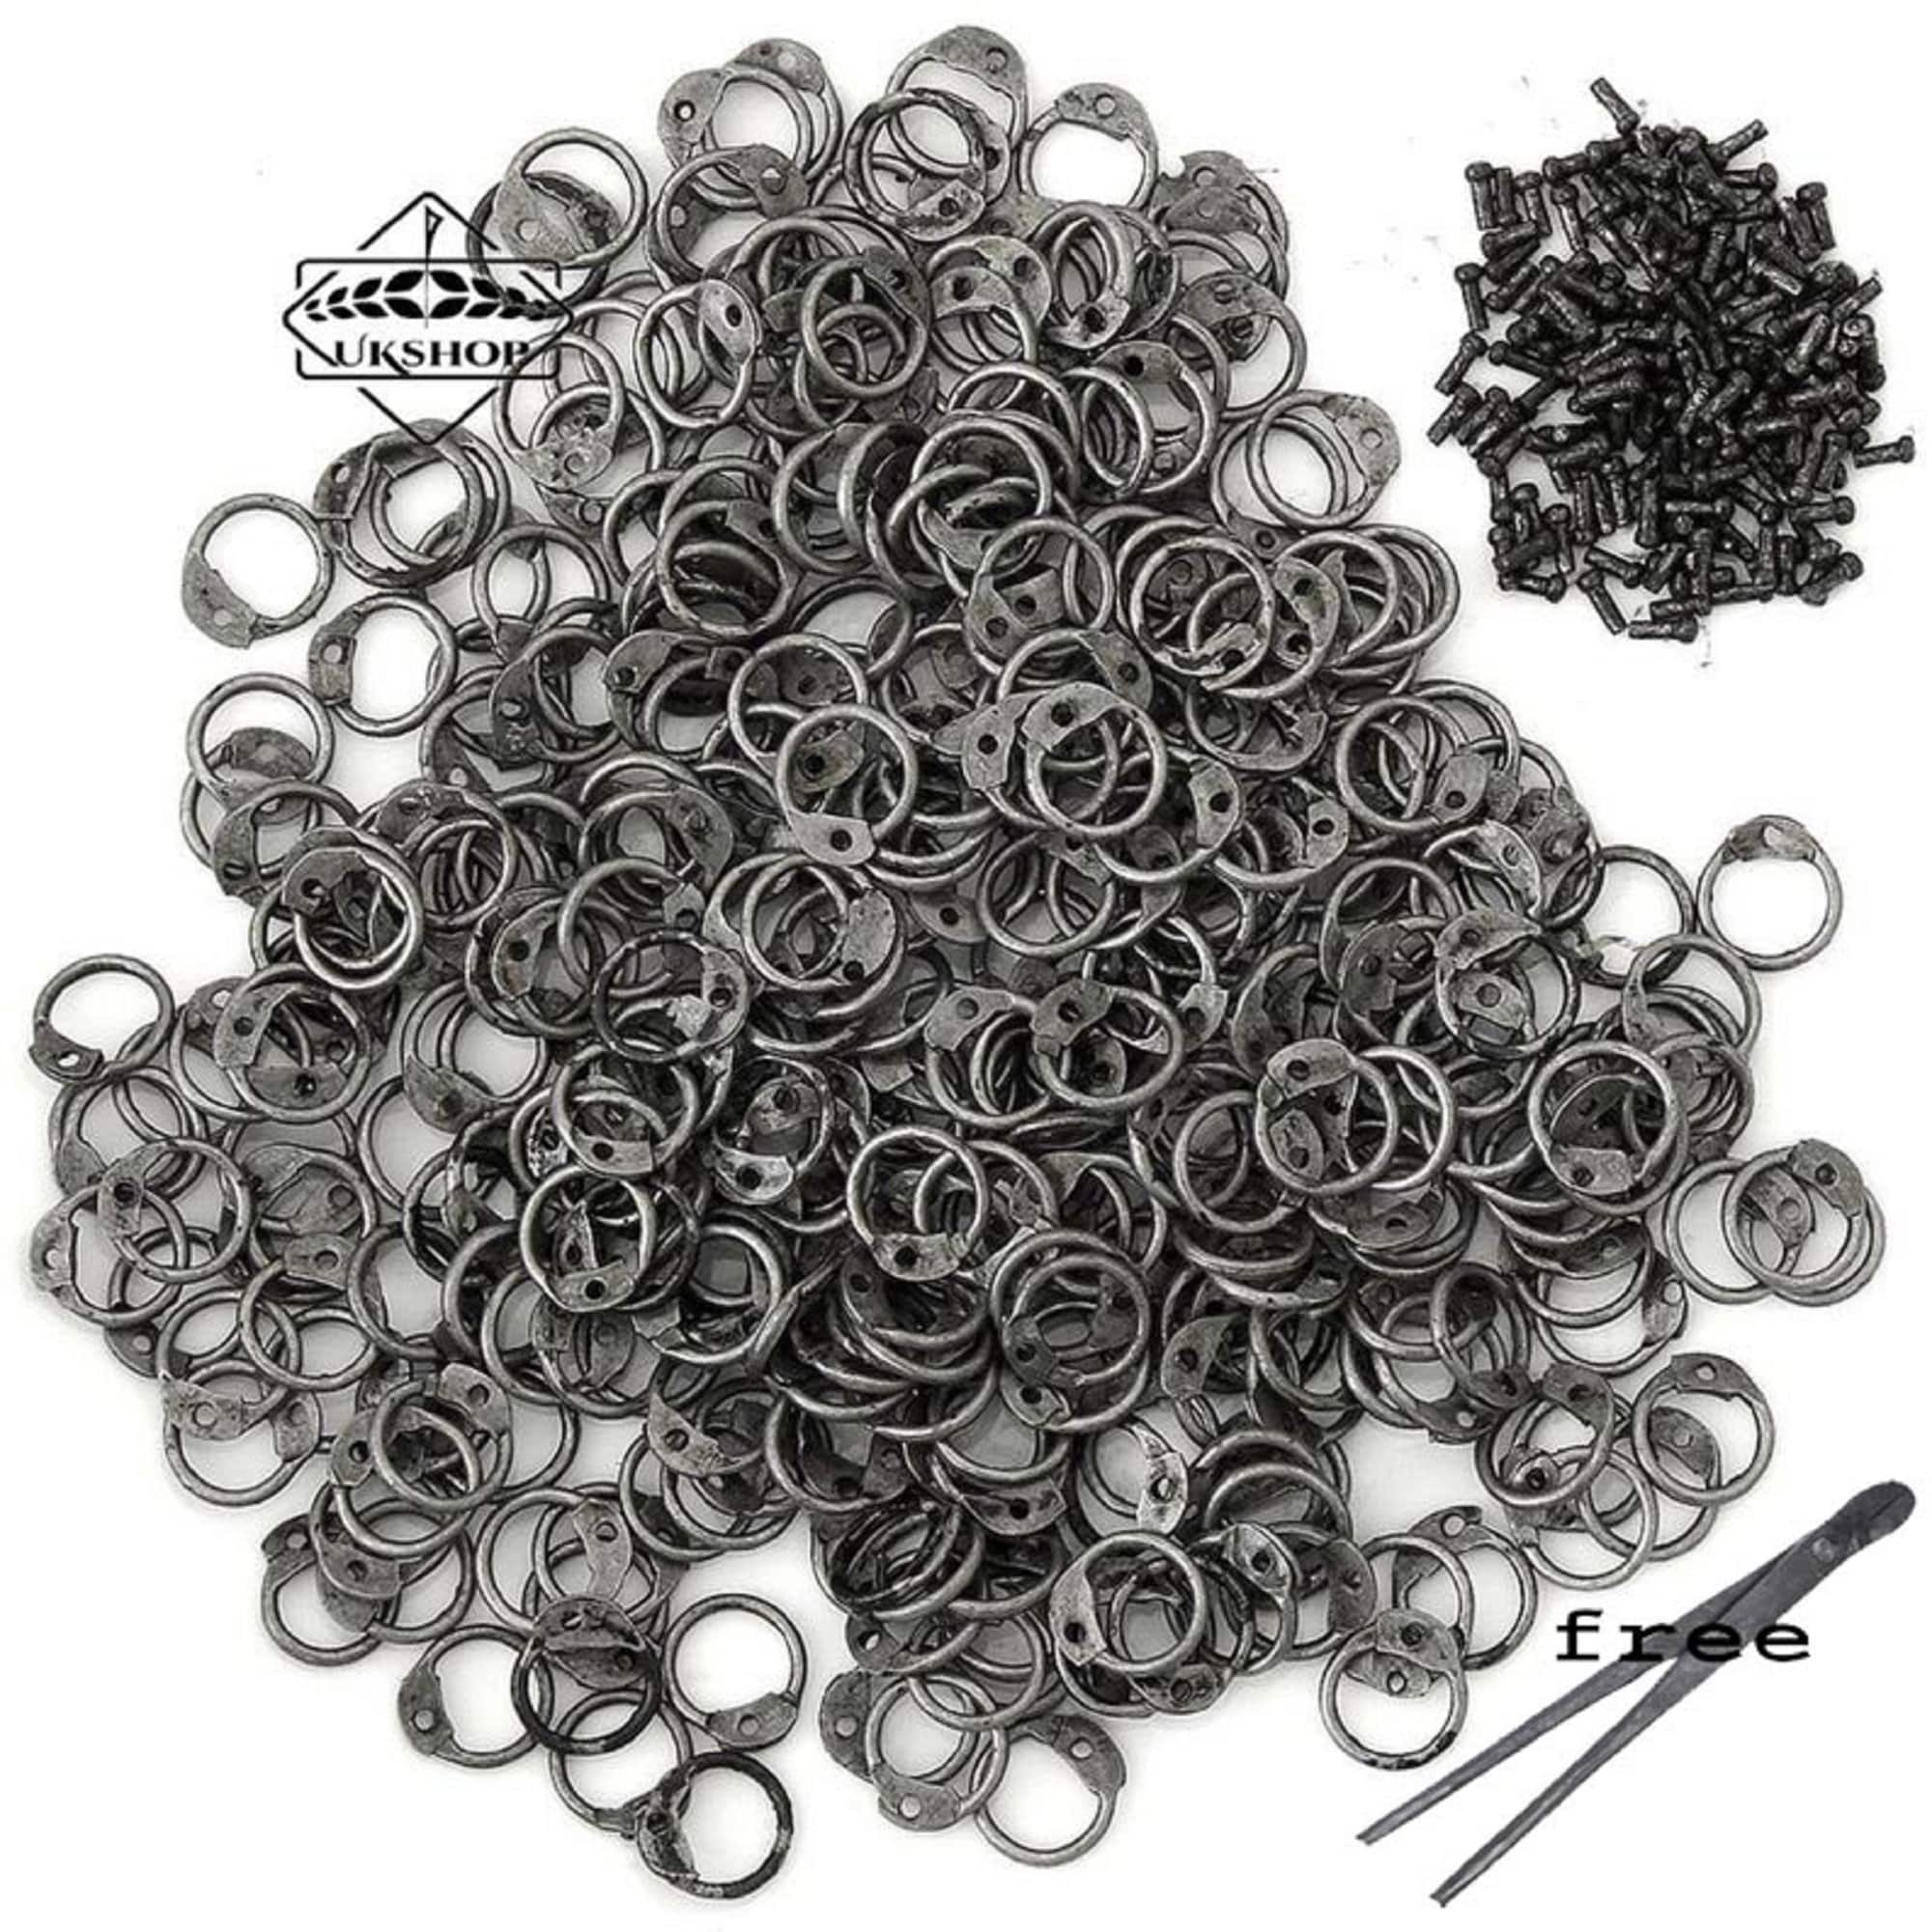 Lord of Battles - 1 kgs Loose Chainmail Rings - Aluminum Dome Riveted Flat  Rings - 16 Gauge / 10 mm